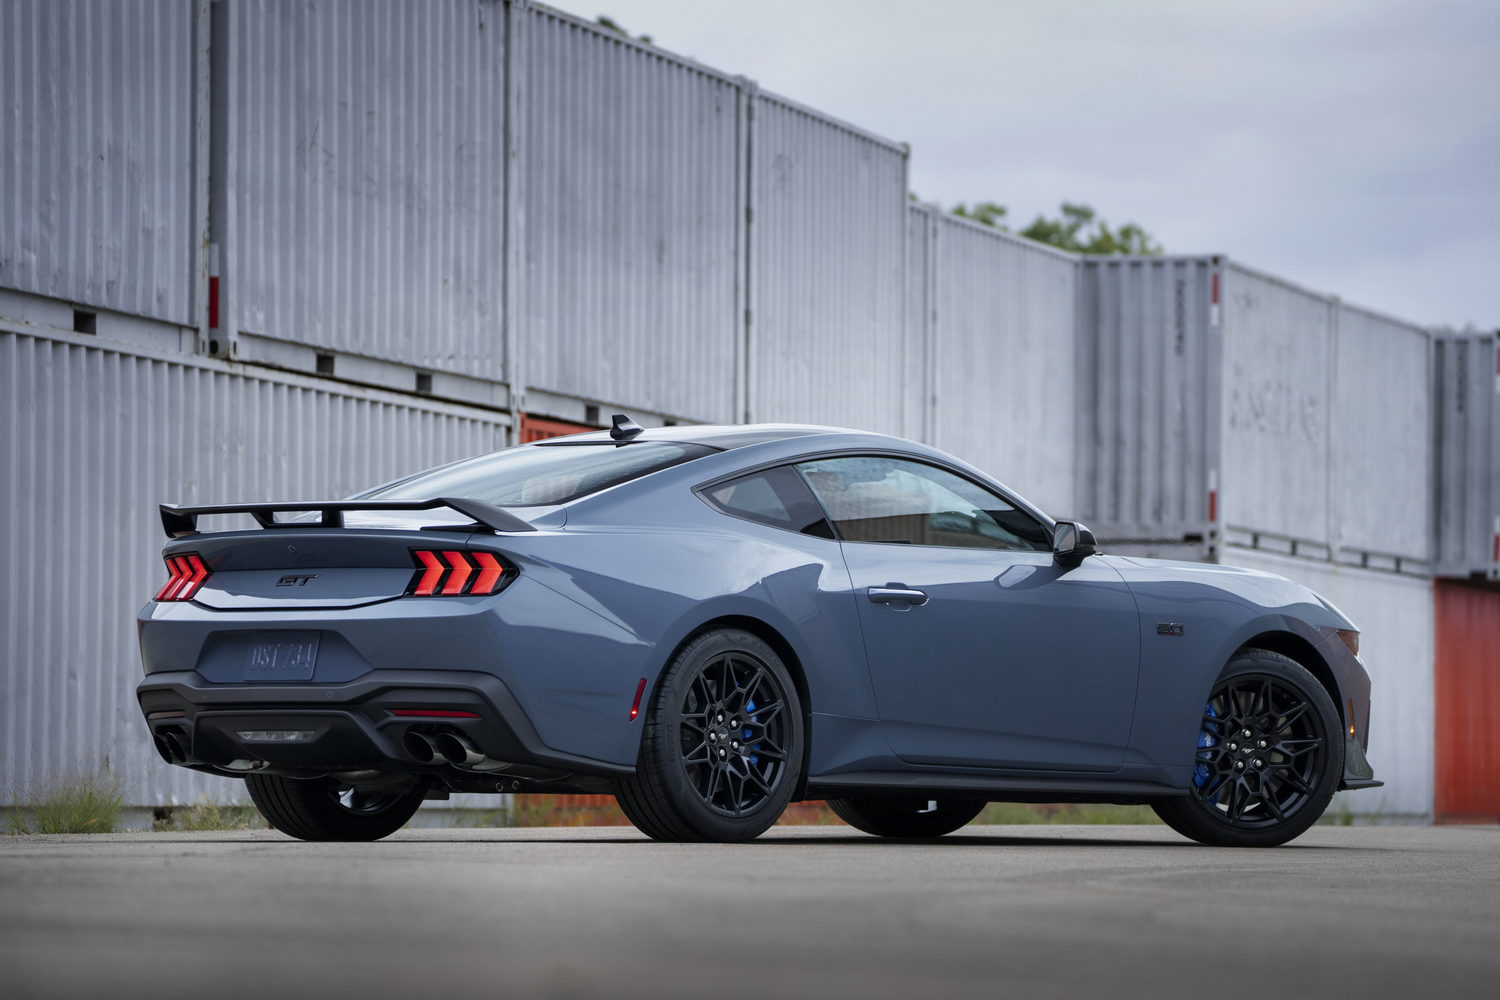 New Ford Mustang arrives next year